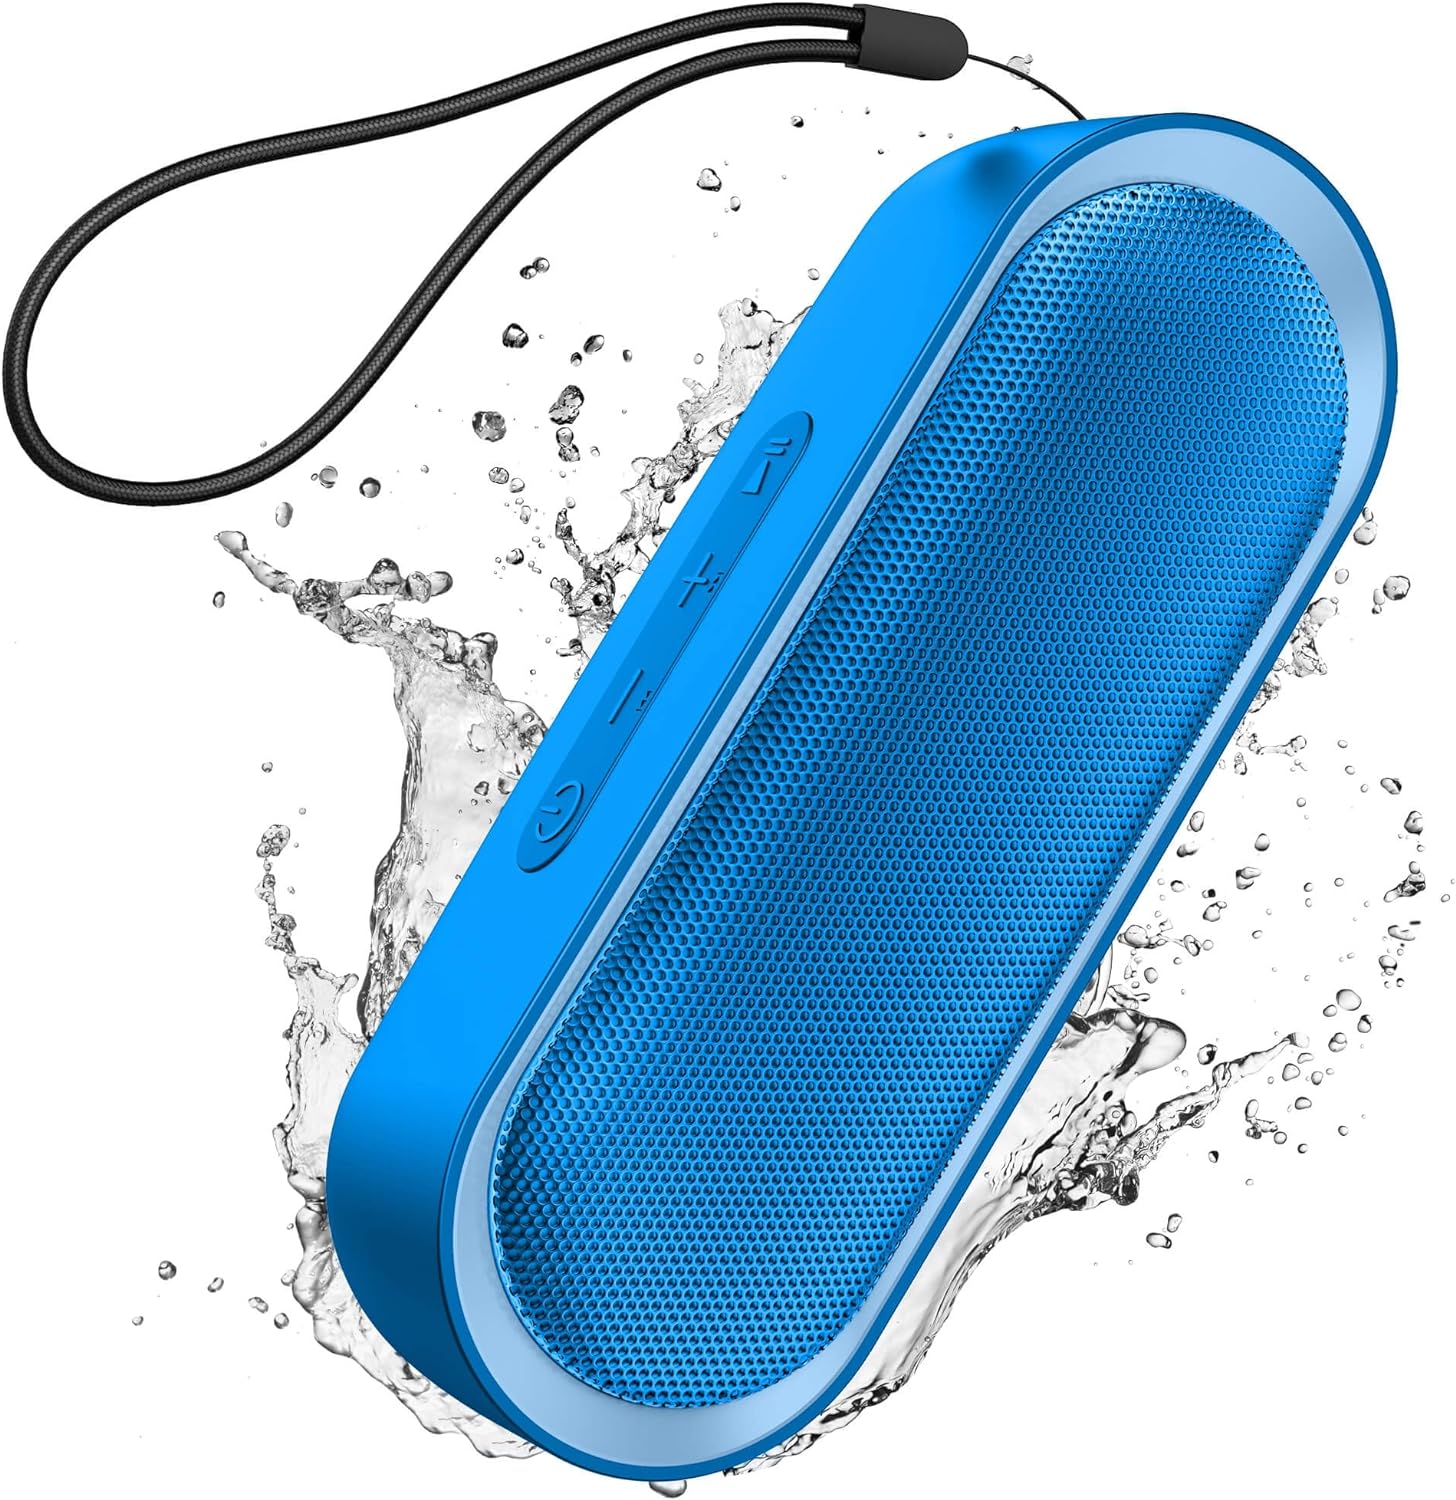 LENRUE Bluetooth Speakers, Waterproof Portable Speakers with TWS, 24 Playtime, Stereo Sound, Wireless for Home Shower Pool Beach Outdoor (Blue)